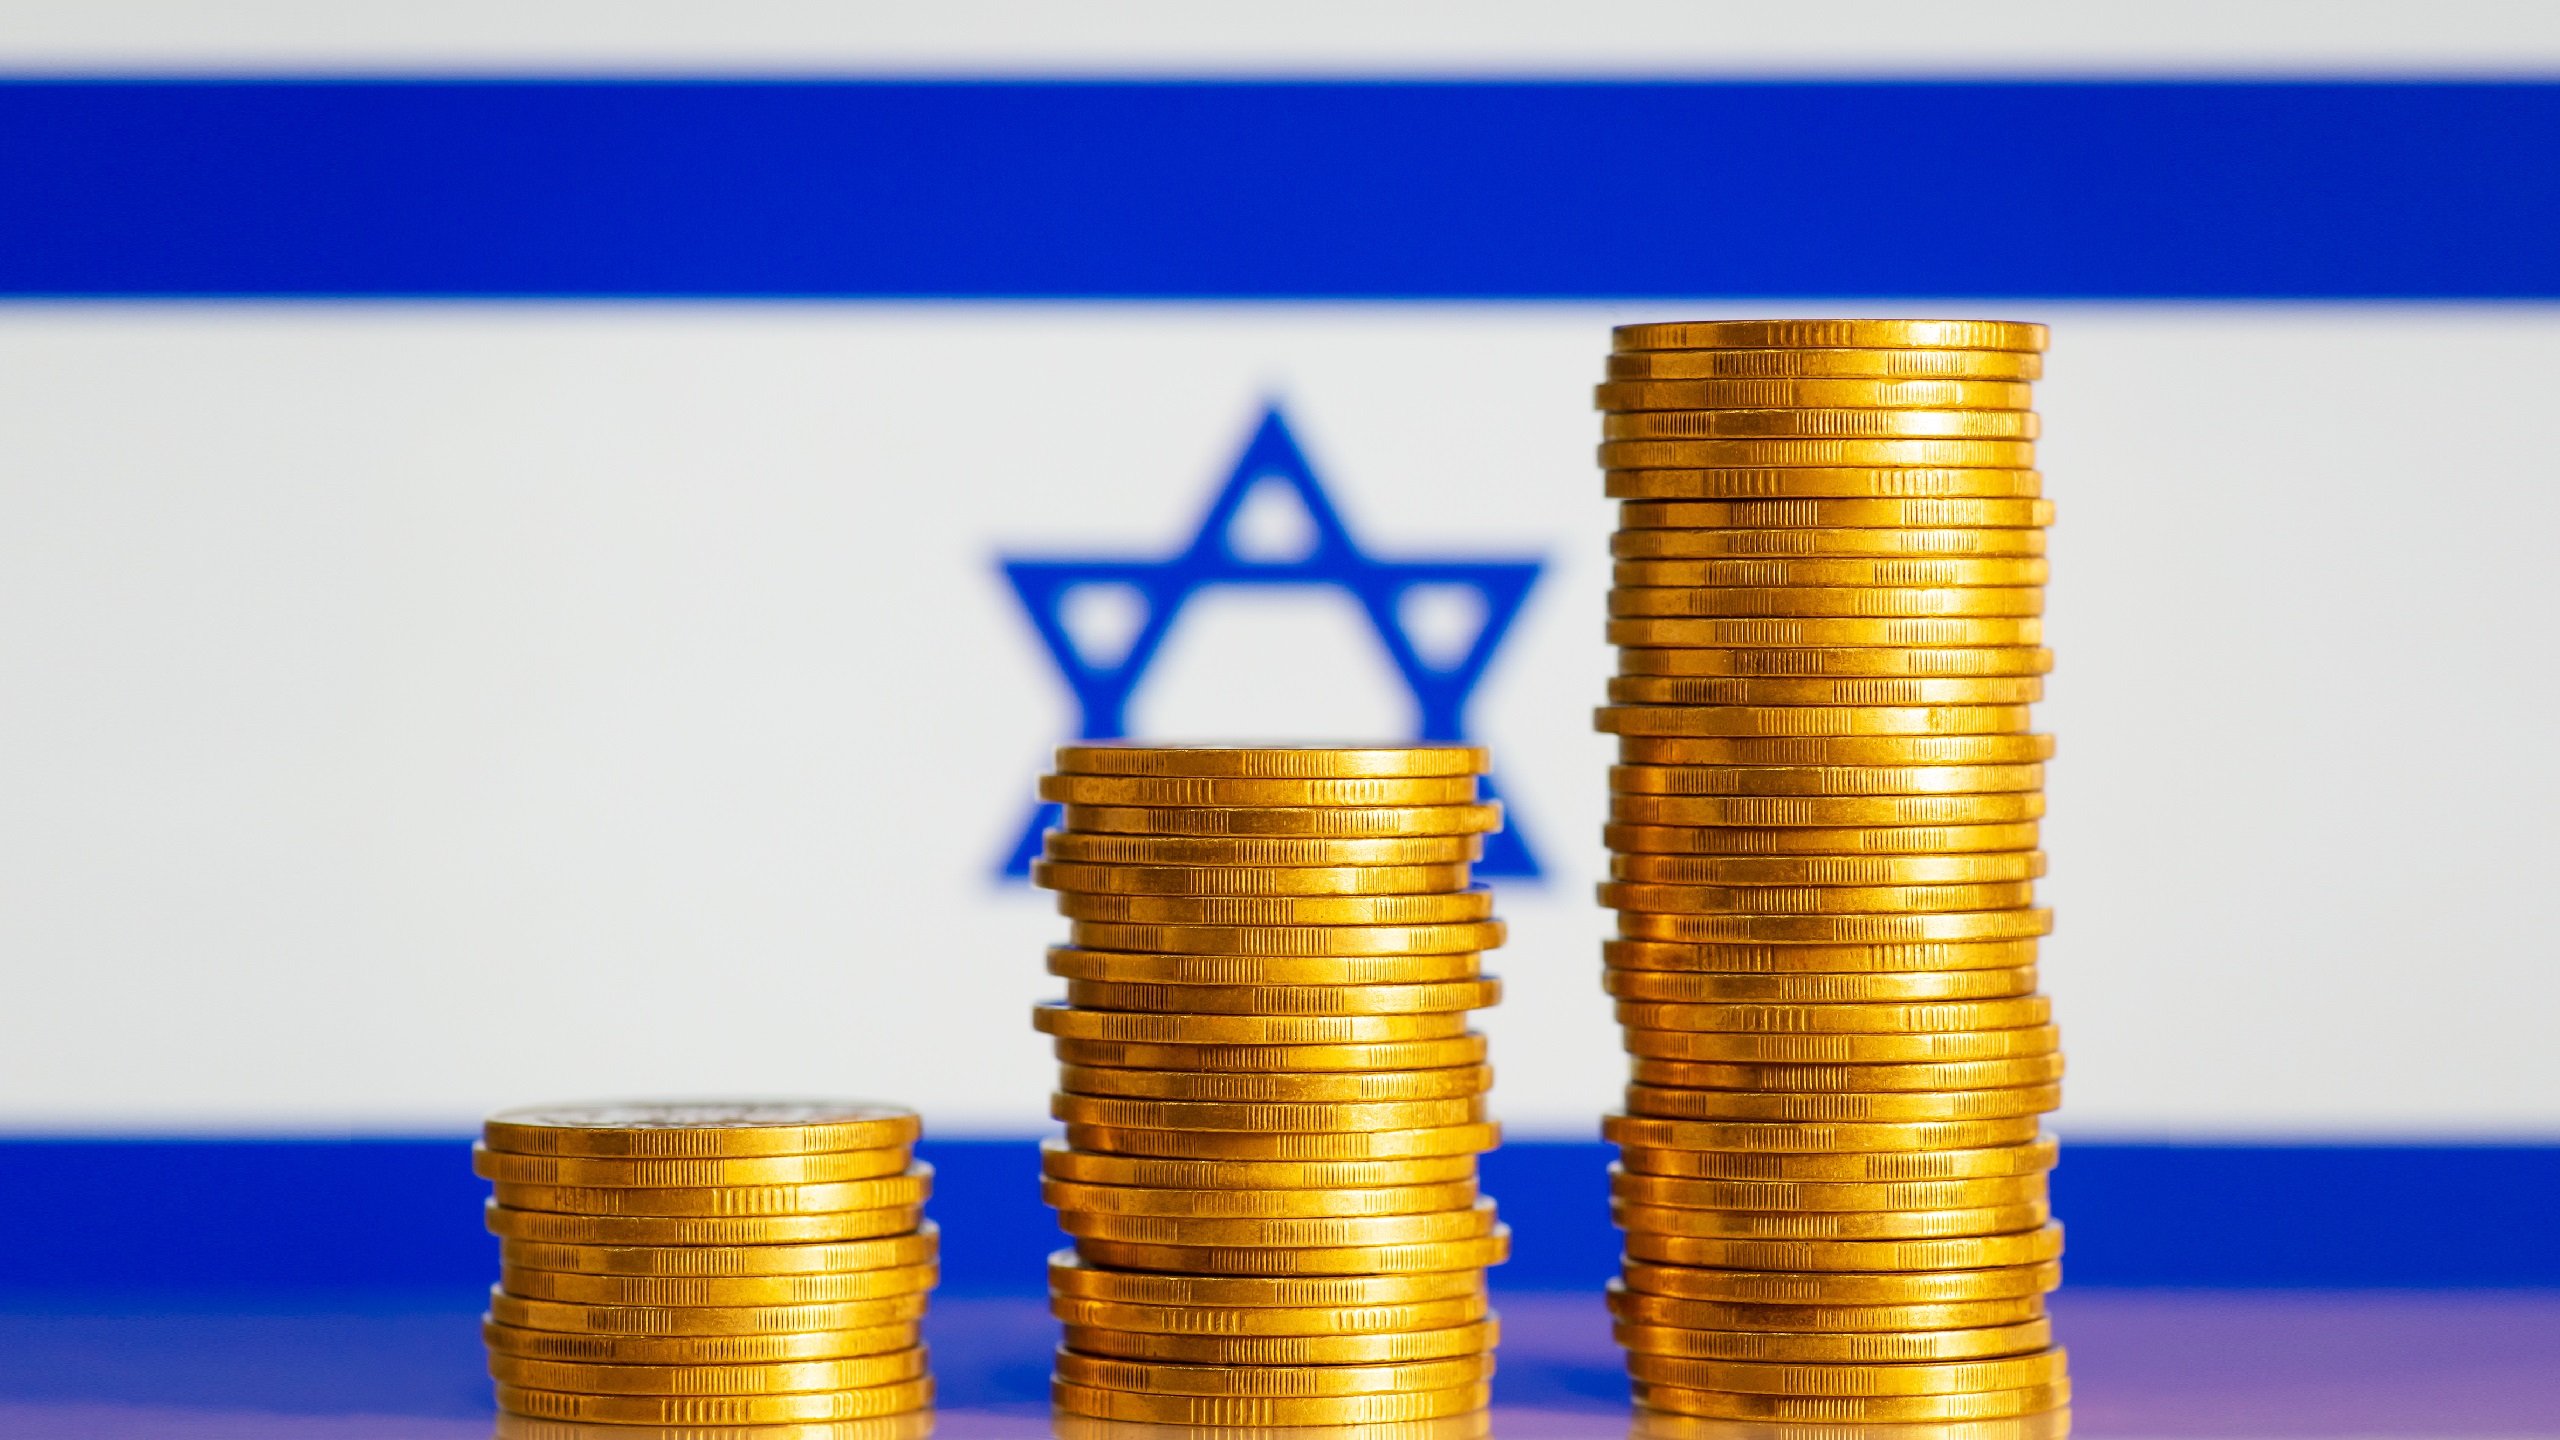 Israel Sees Spike in Inflation to 4.1% in August, Linked to Shekel Devaluation